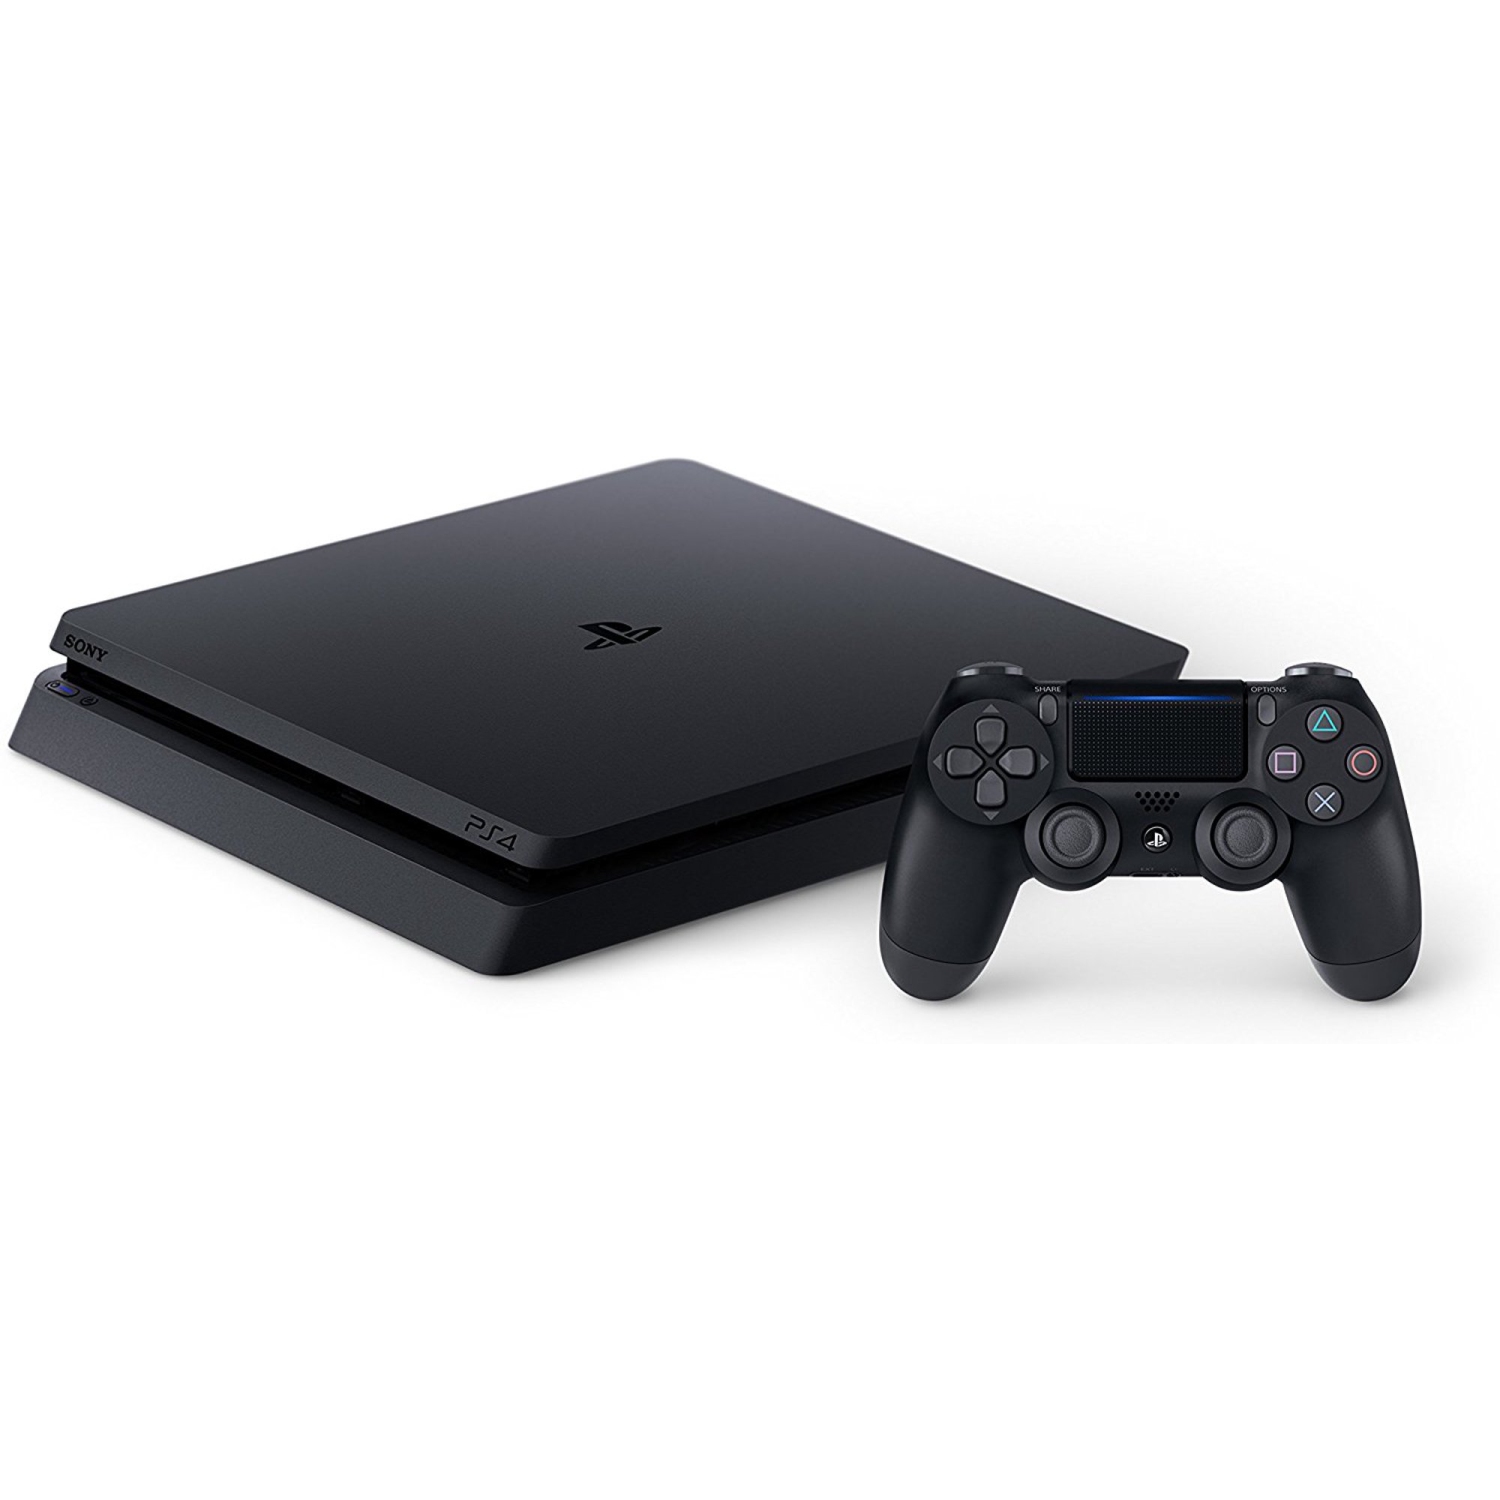 Refurbished (Excellent) - Sony PS4 PlayStation 4 CUH2015B 1TB Hard Drive with Controller - Certified Refurbished